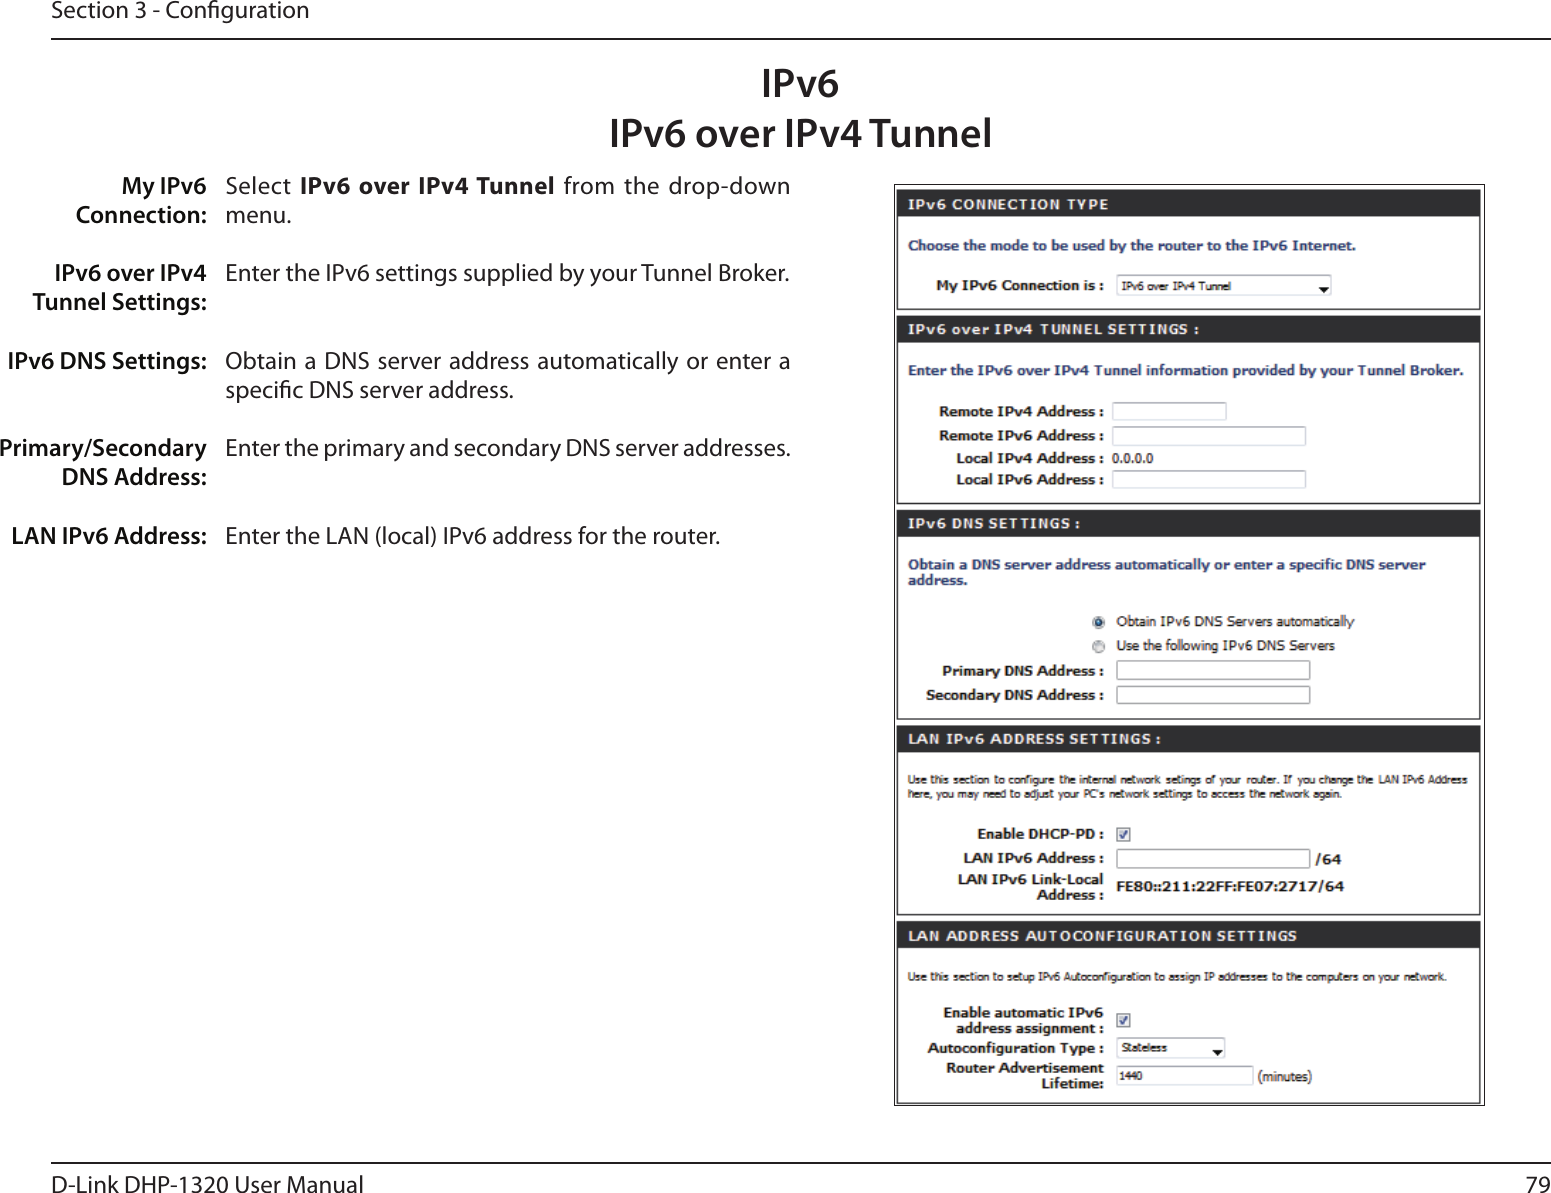 79D-Link DHP-1320 User ManualSection 3 - CongurationIPv6 over IPv4 TunnelSelect  IPv6 over IPv4 Tunnel from  the  drop-down menu.Enter the IPv6 settings supplied by your Tunnel Broker. Obtain a DNS server address automatically or enter a specic DNS server address. Enter the primary and secondary DNS server addresses. Enter the LAN (local) IPv6 address for the router. My IPv6 Connection:IPv6 over IPv4 Tunnel Settings:IPv6 DNS Settings:Primary/Secondary DNS Address:LAN IPv6 Address:IPv6